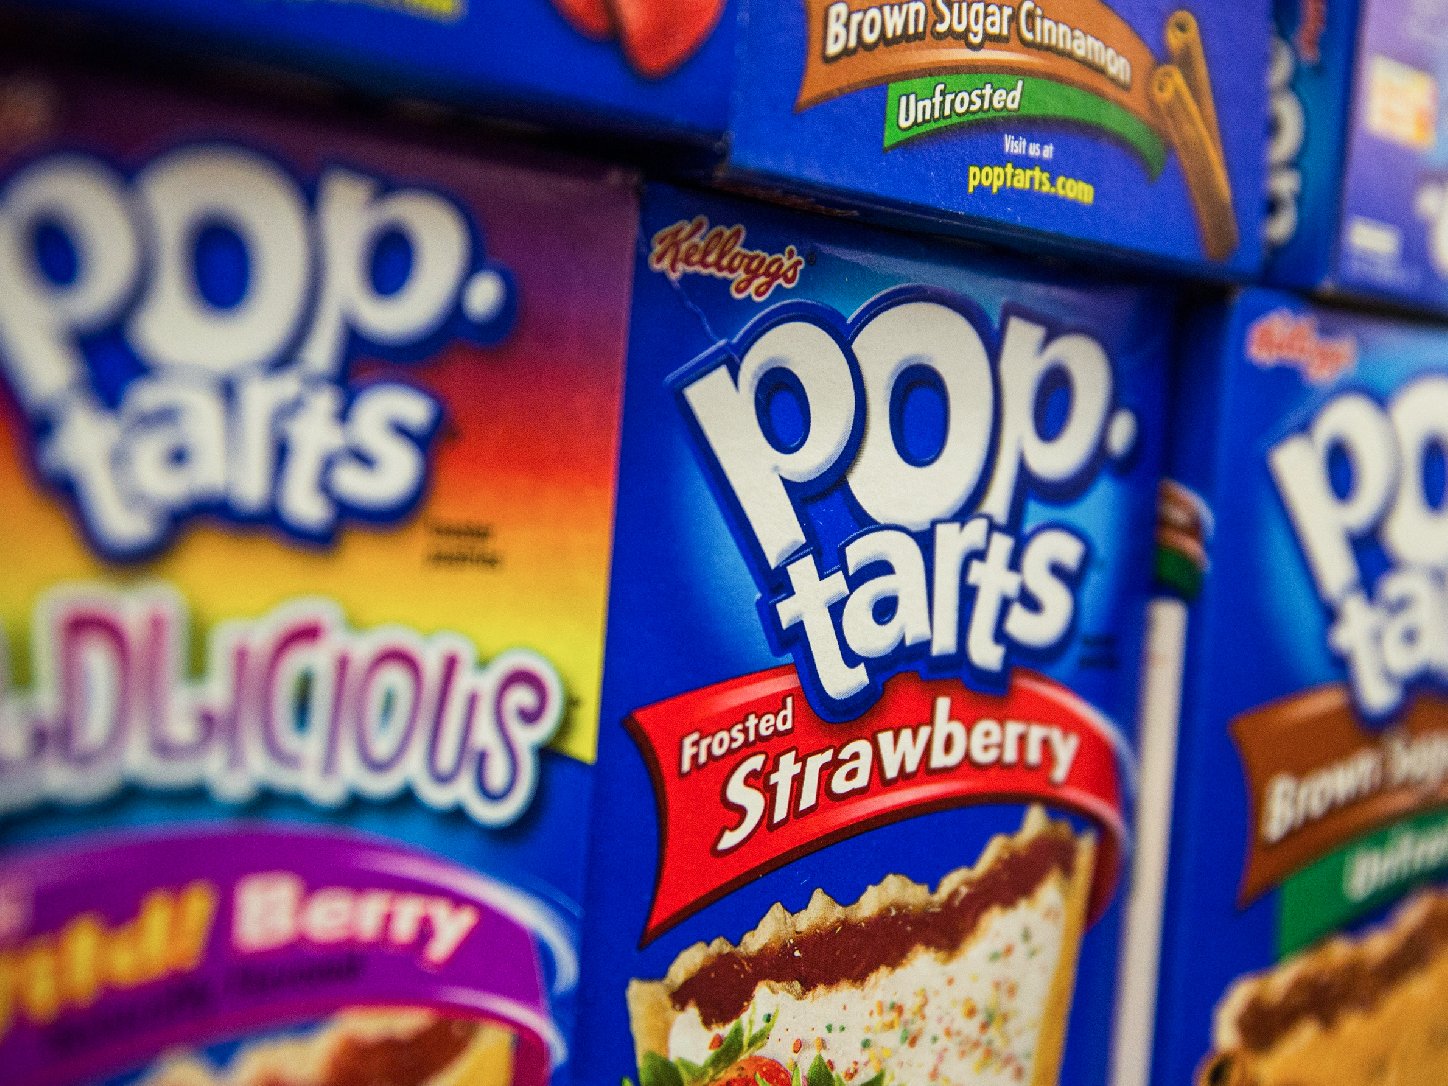 Kellogg, maker of Pop-Tarts, announced Feb. 14 that it will buy palm oil — an ingredient in Pop-Tarts — only from companies that don't destroy rain forests where palm trees are grown. Photo: Andrew Burton/Getty Images